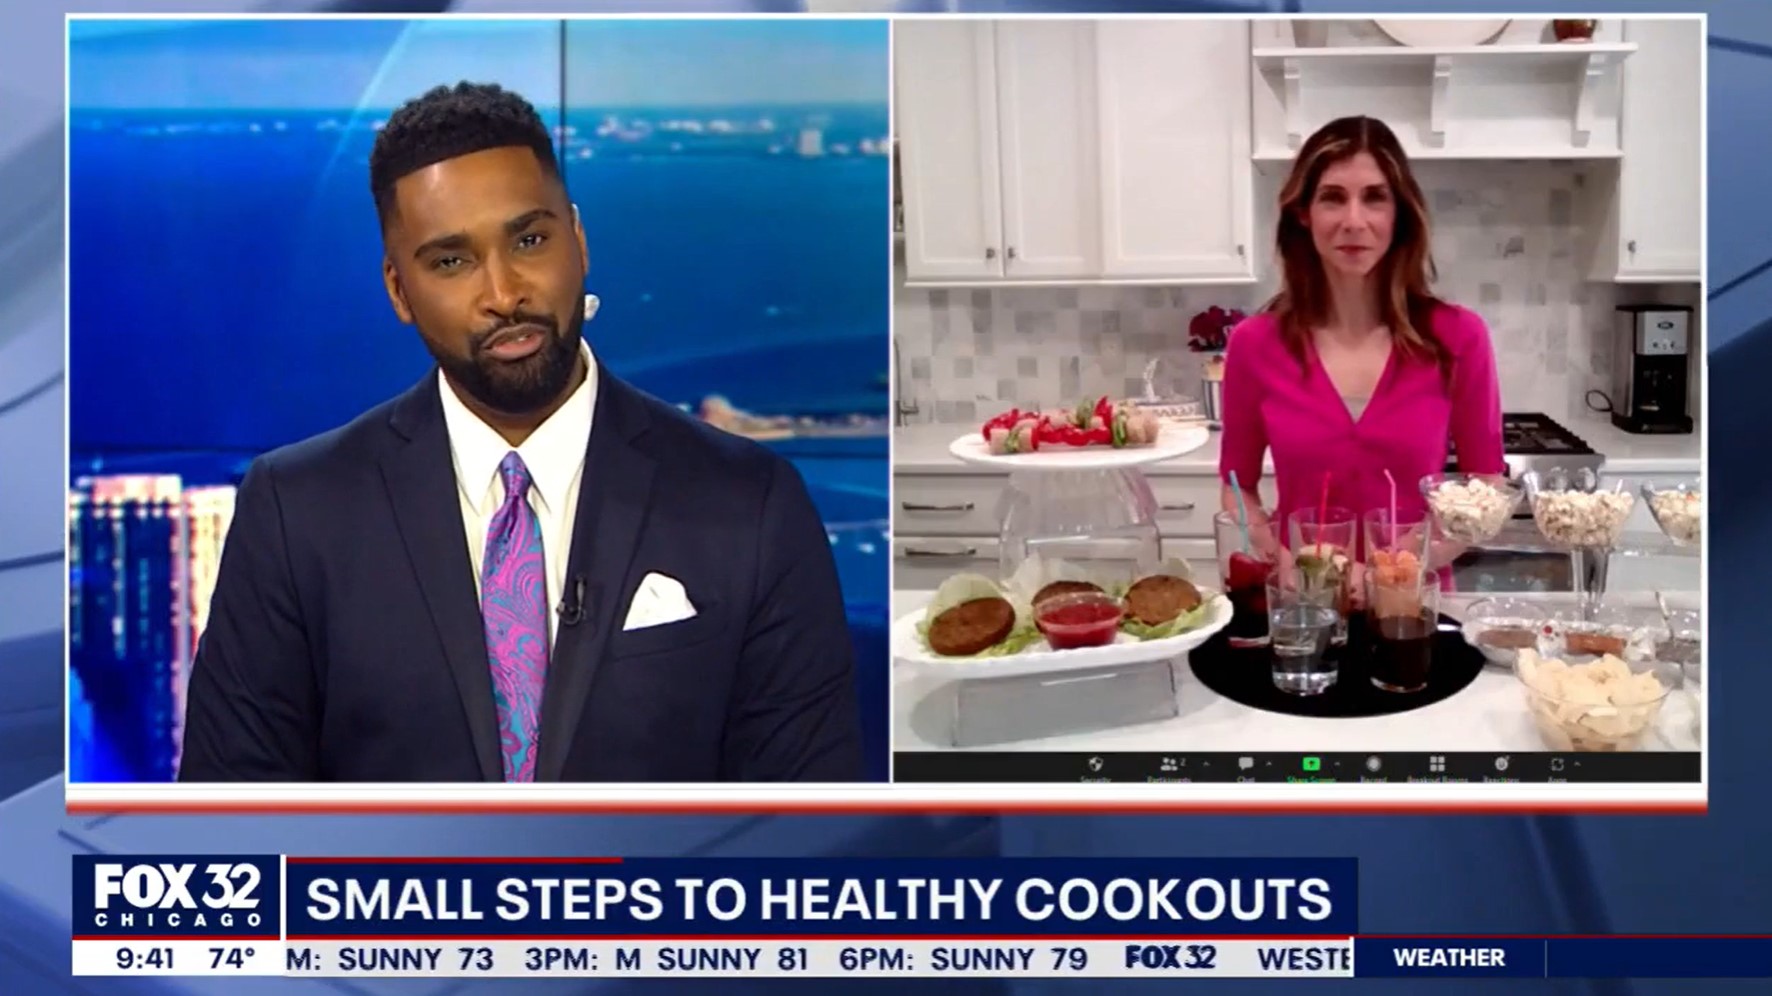 Small steps you can take for healthier cookouts